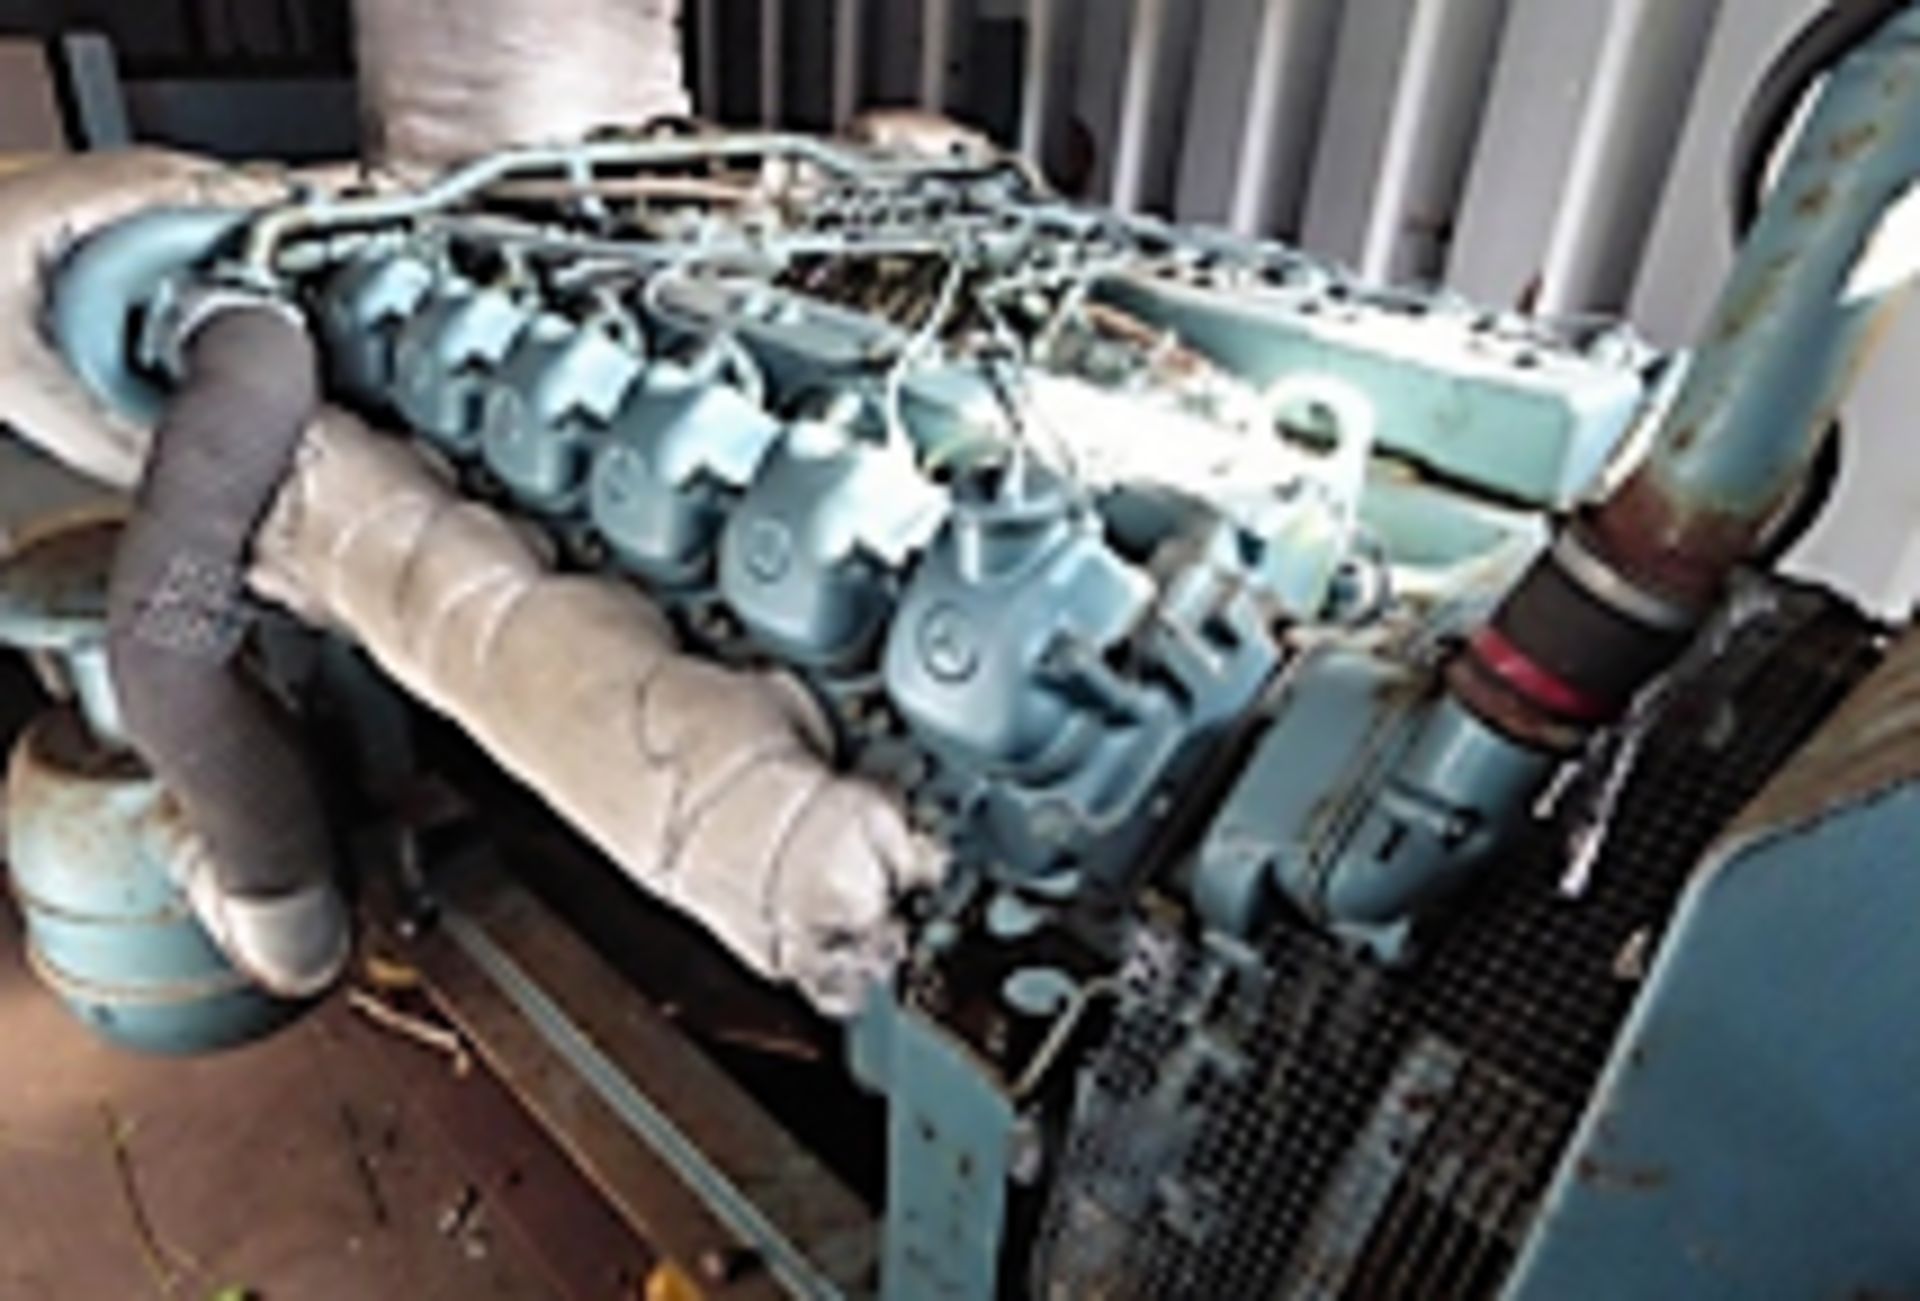 MERCEDES V12 diesel 300KVA generator housed in 20ft container with self contained fuel tank. Working